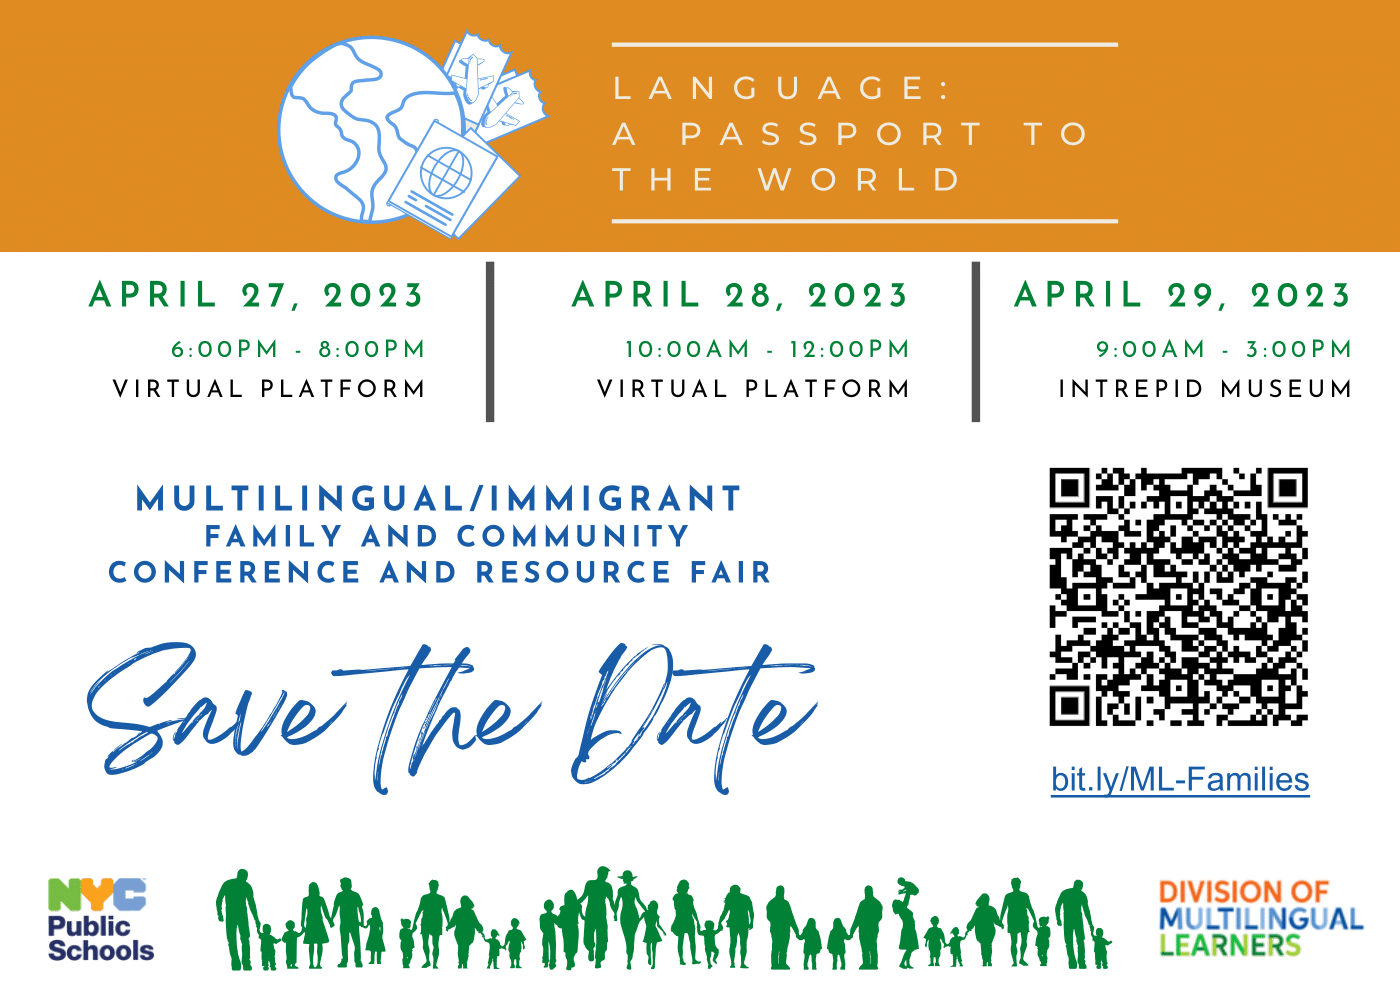 Multilingual/Immigrant family and Community Conference and Resource fair. 4/27, 4/28, 4/29